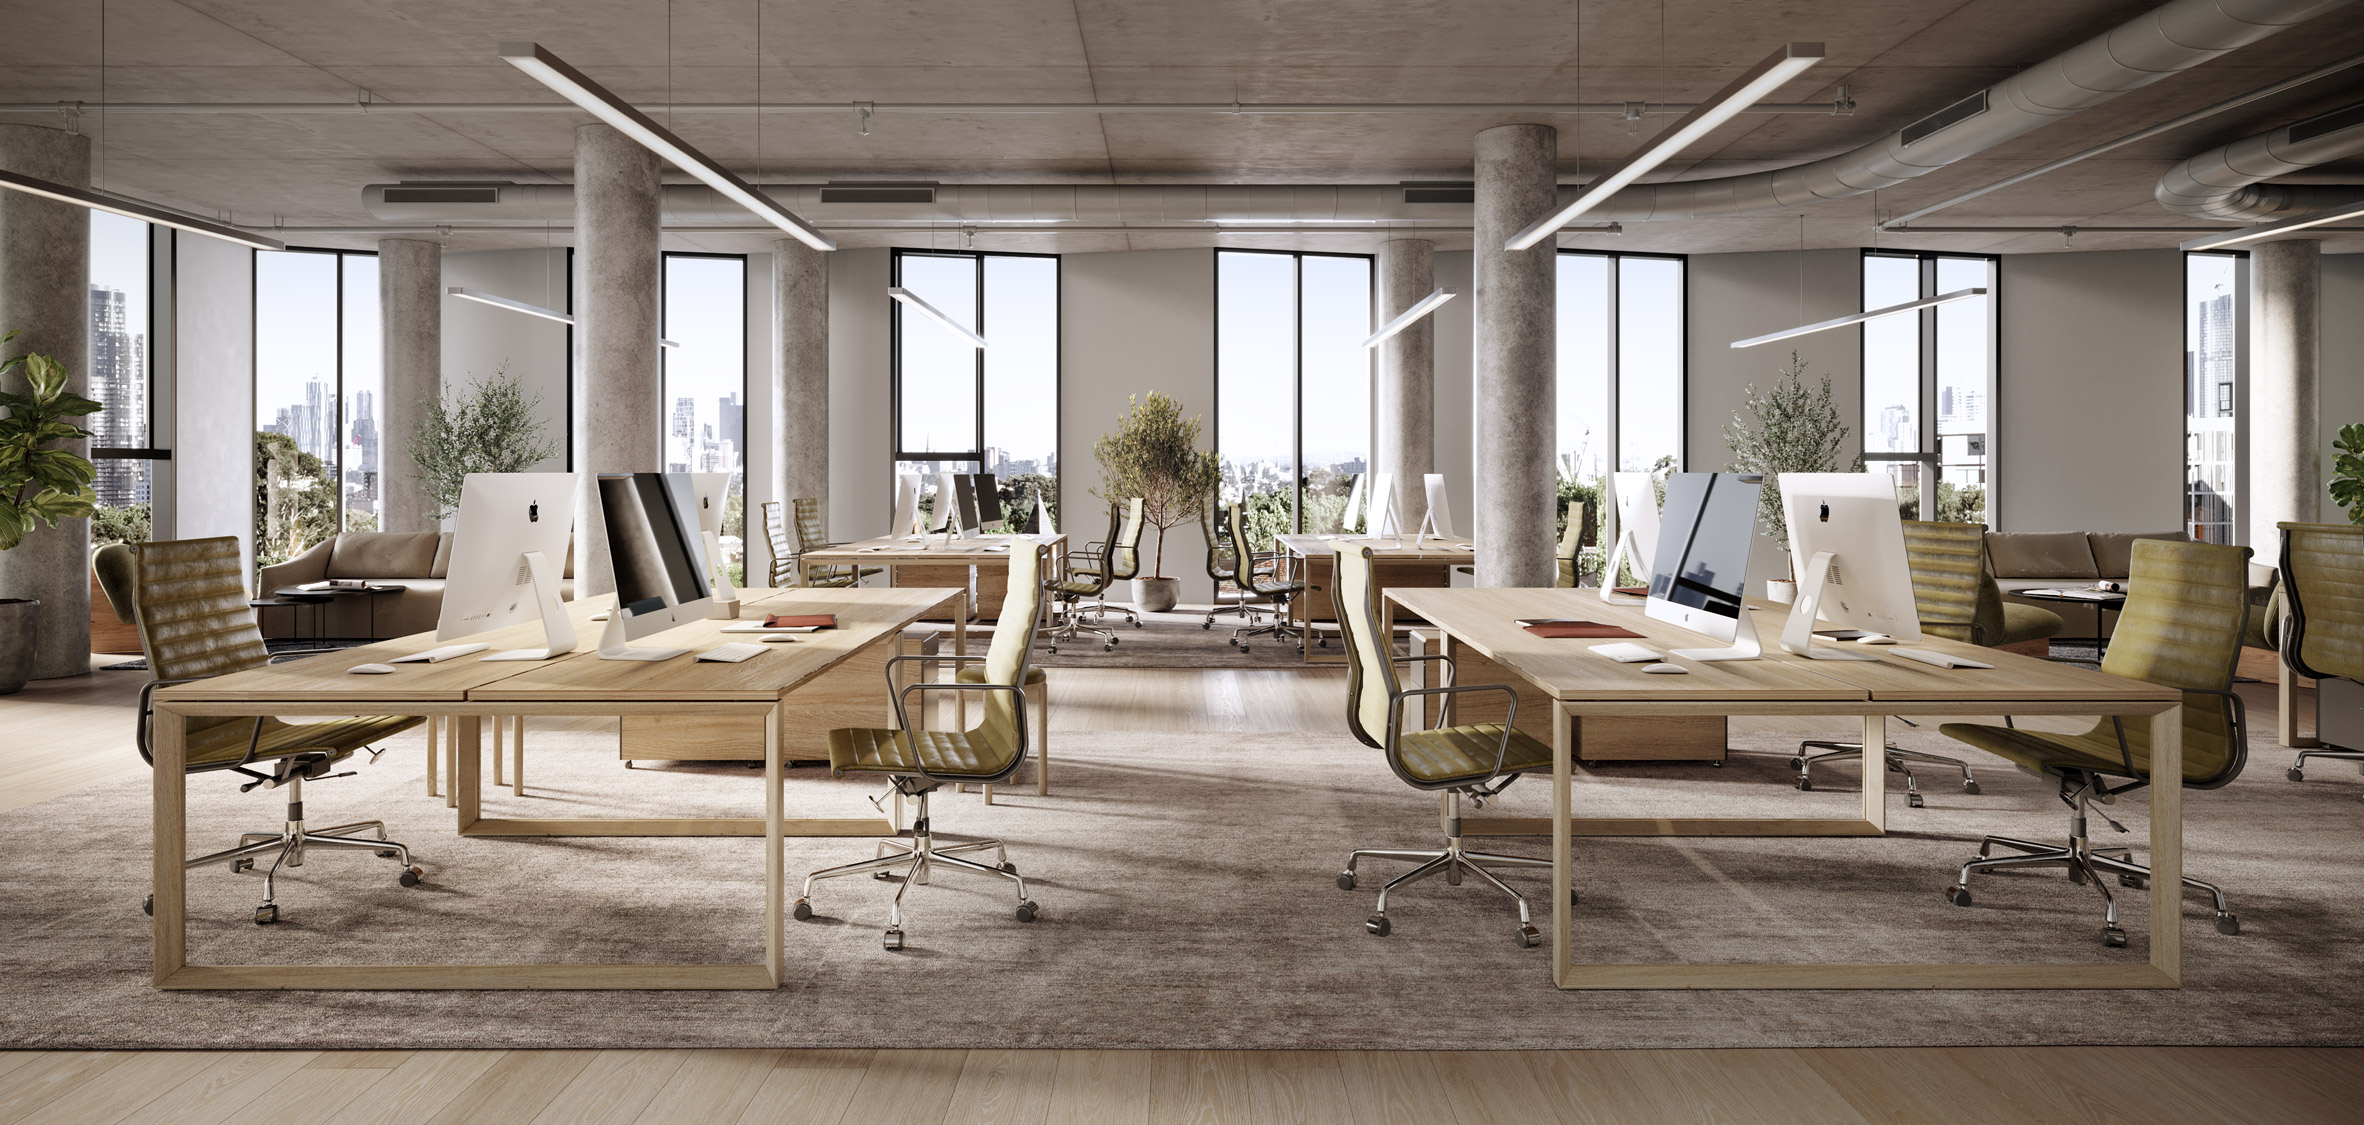 Render of the interior of 550 Spencer offices